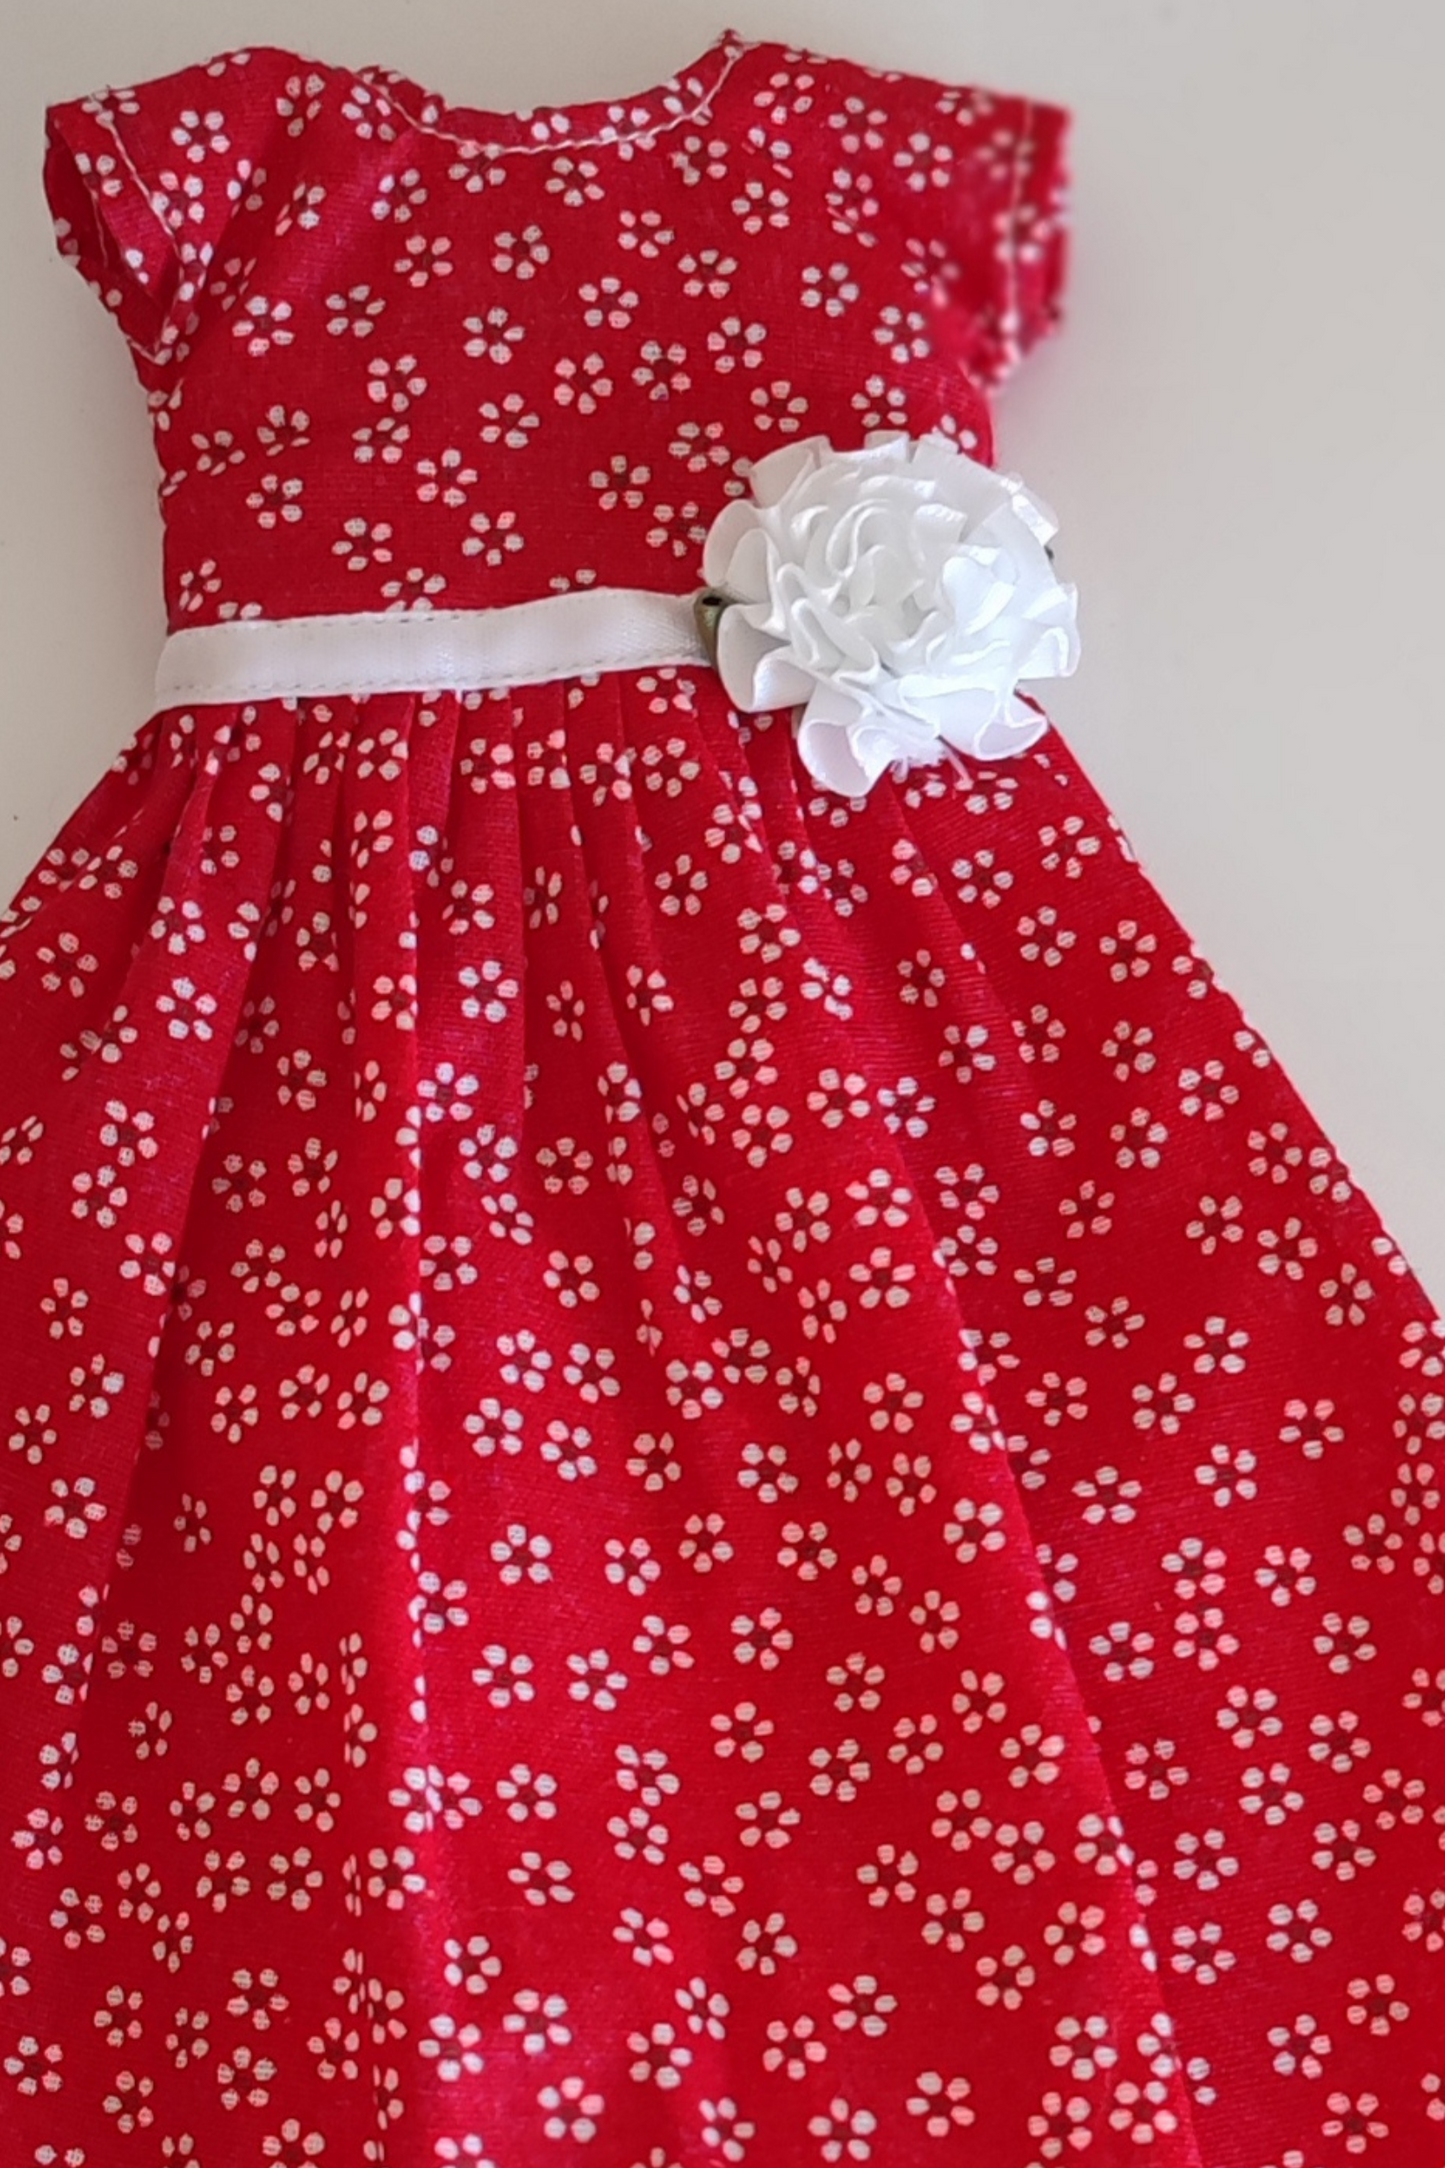 Provence red dress